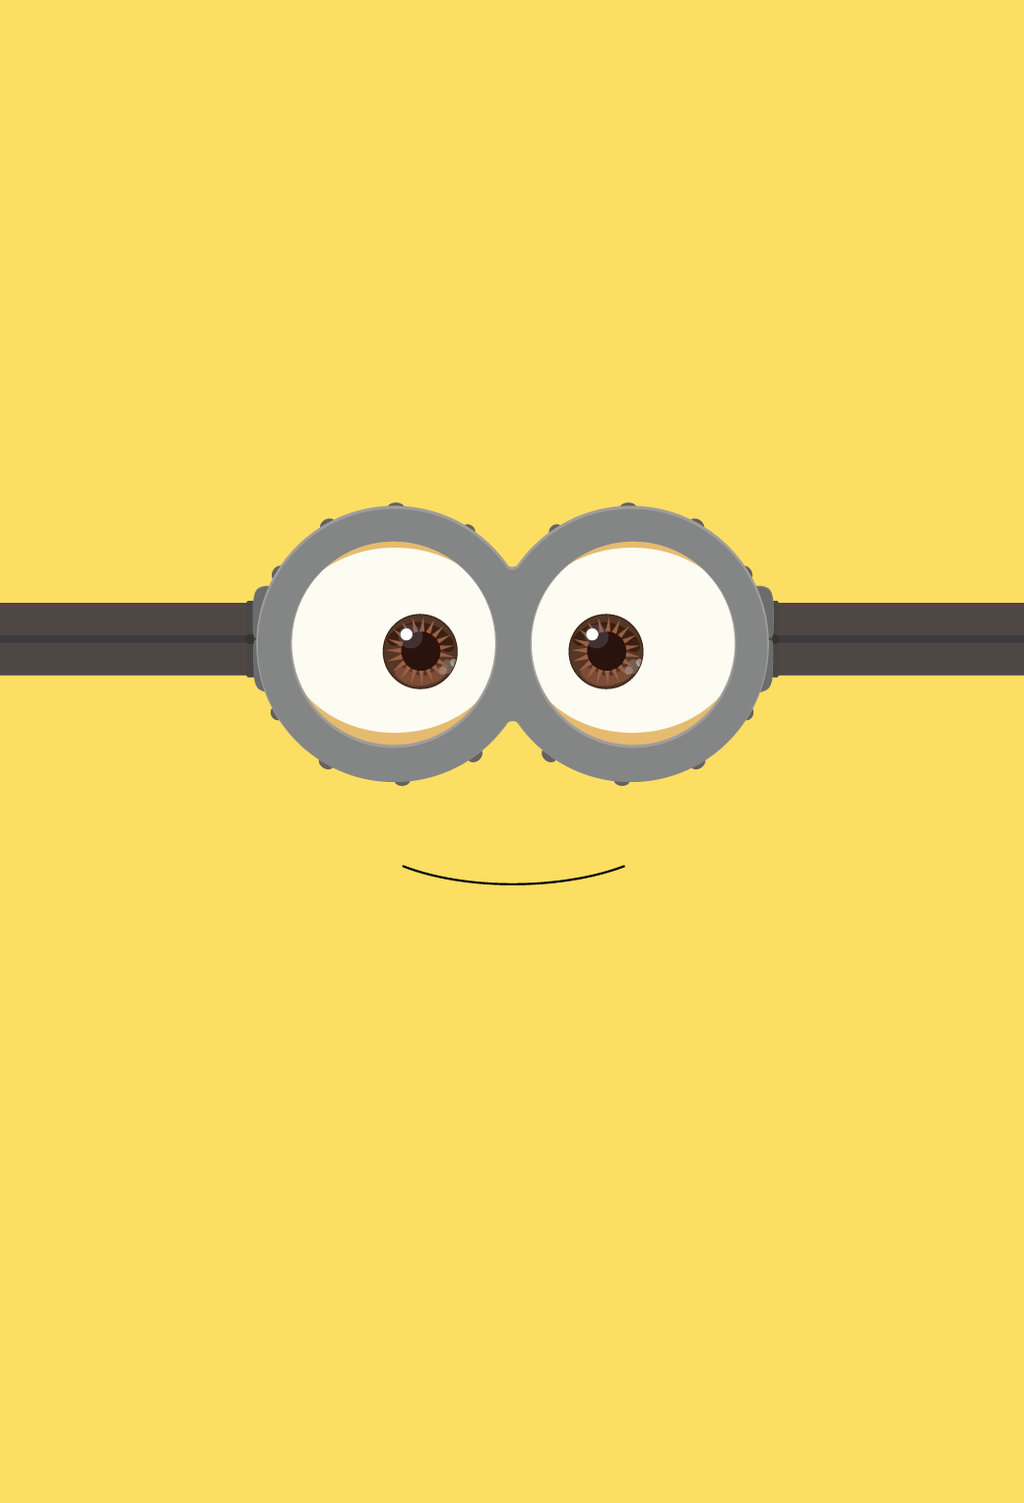  Minion  Tumblr  Wallpapers  Wallpaper  Cave